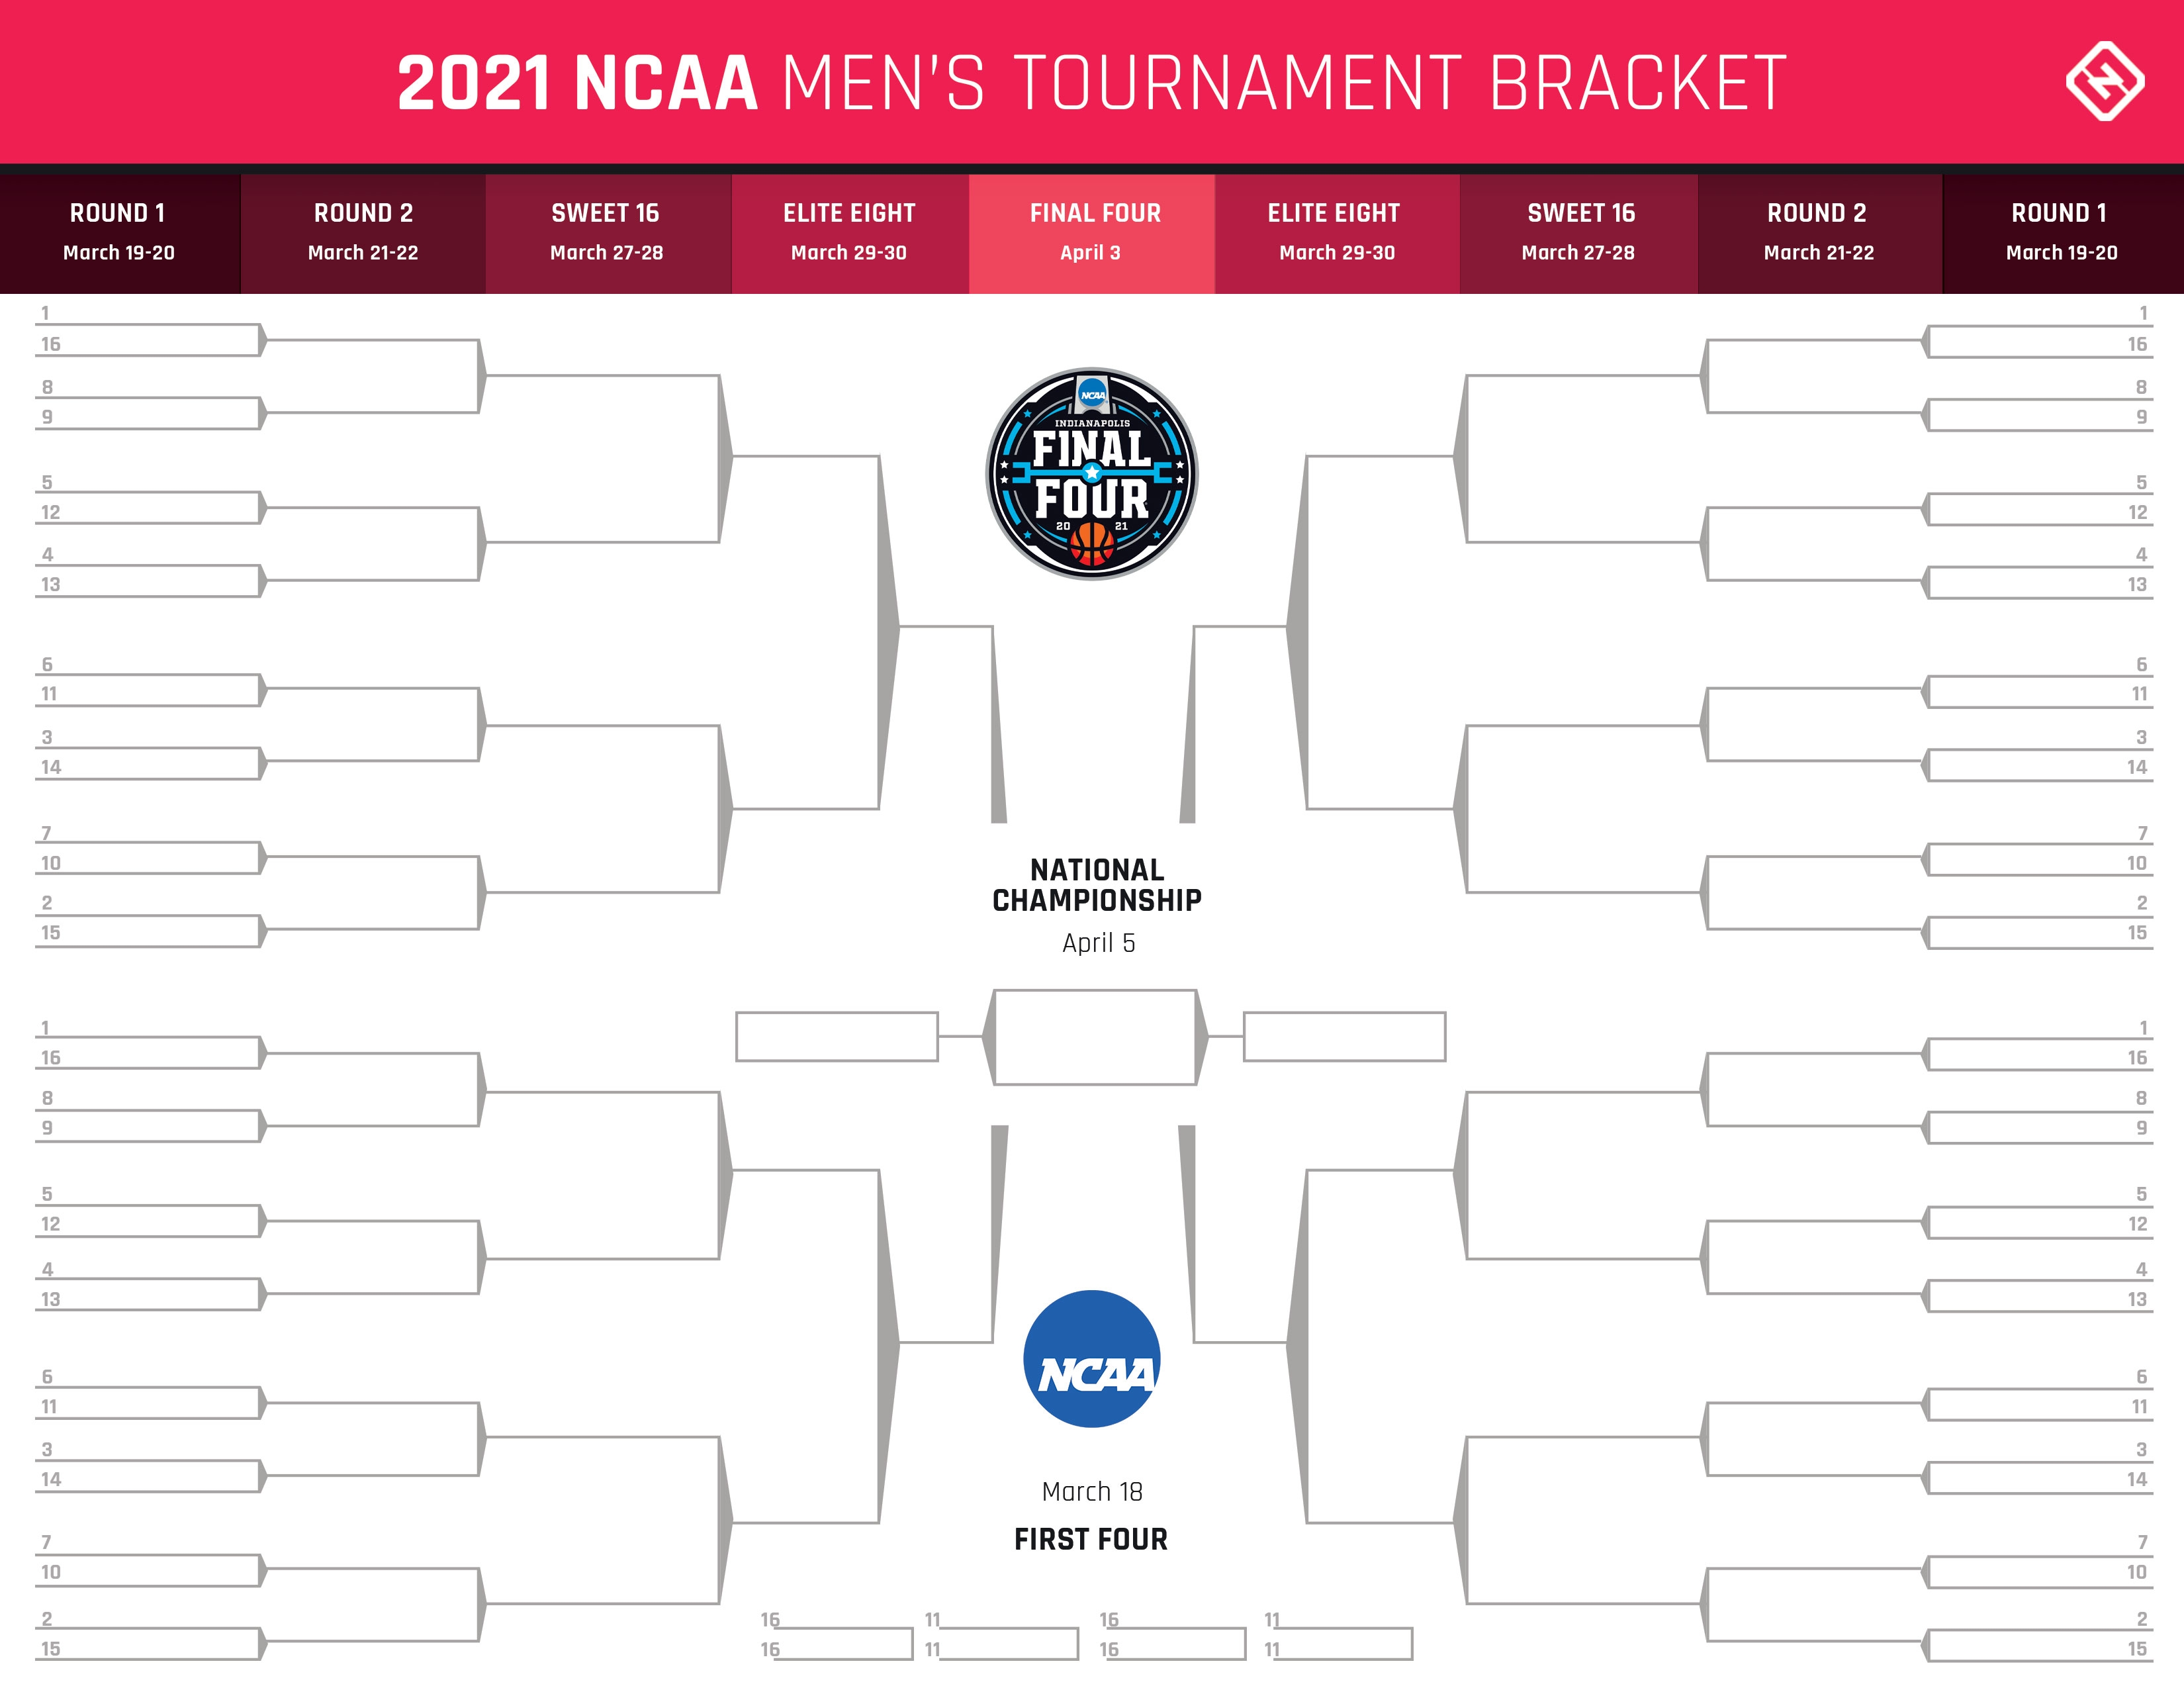 March Madness printable bracket: Download a free 2021 NCAA Tournament